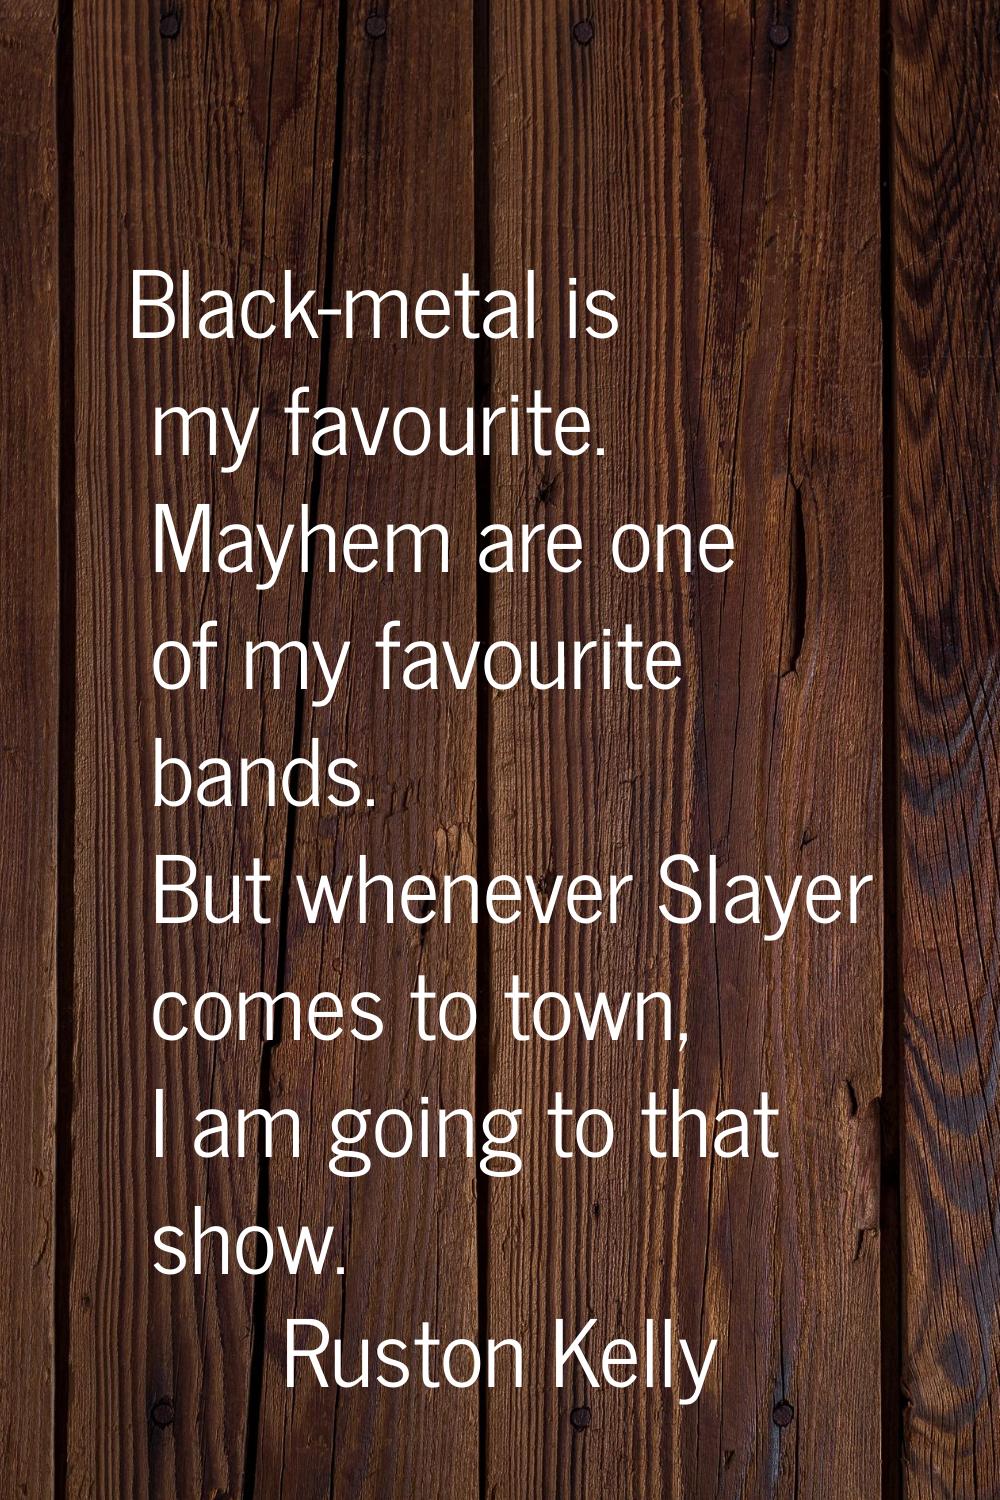 Black-metal is my favourite. Mayhem are one of my favourite bands. But whenever Slayer comes to tow